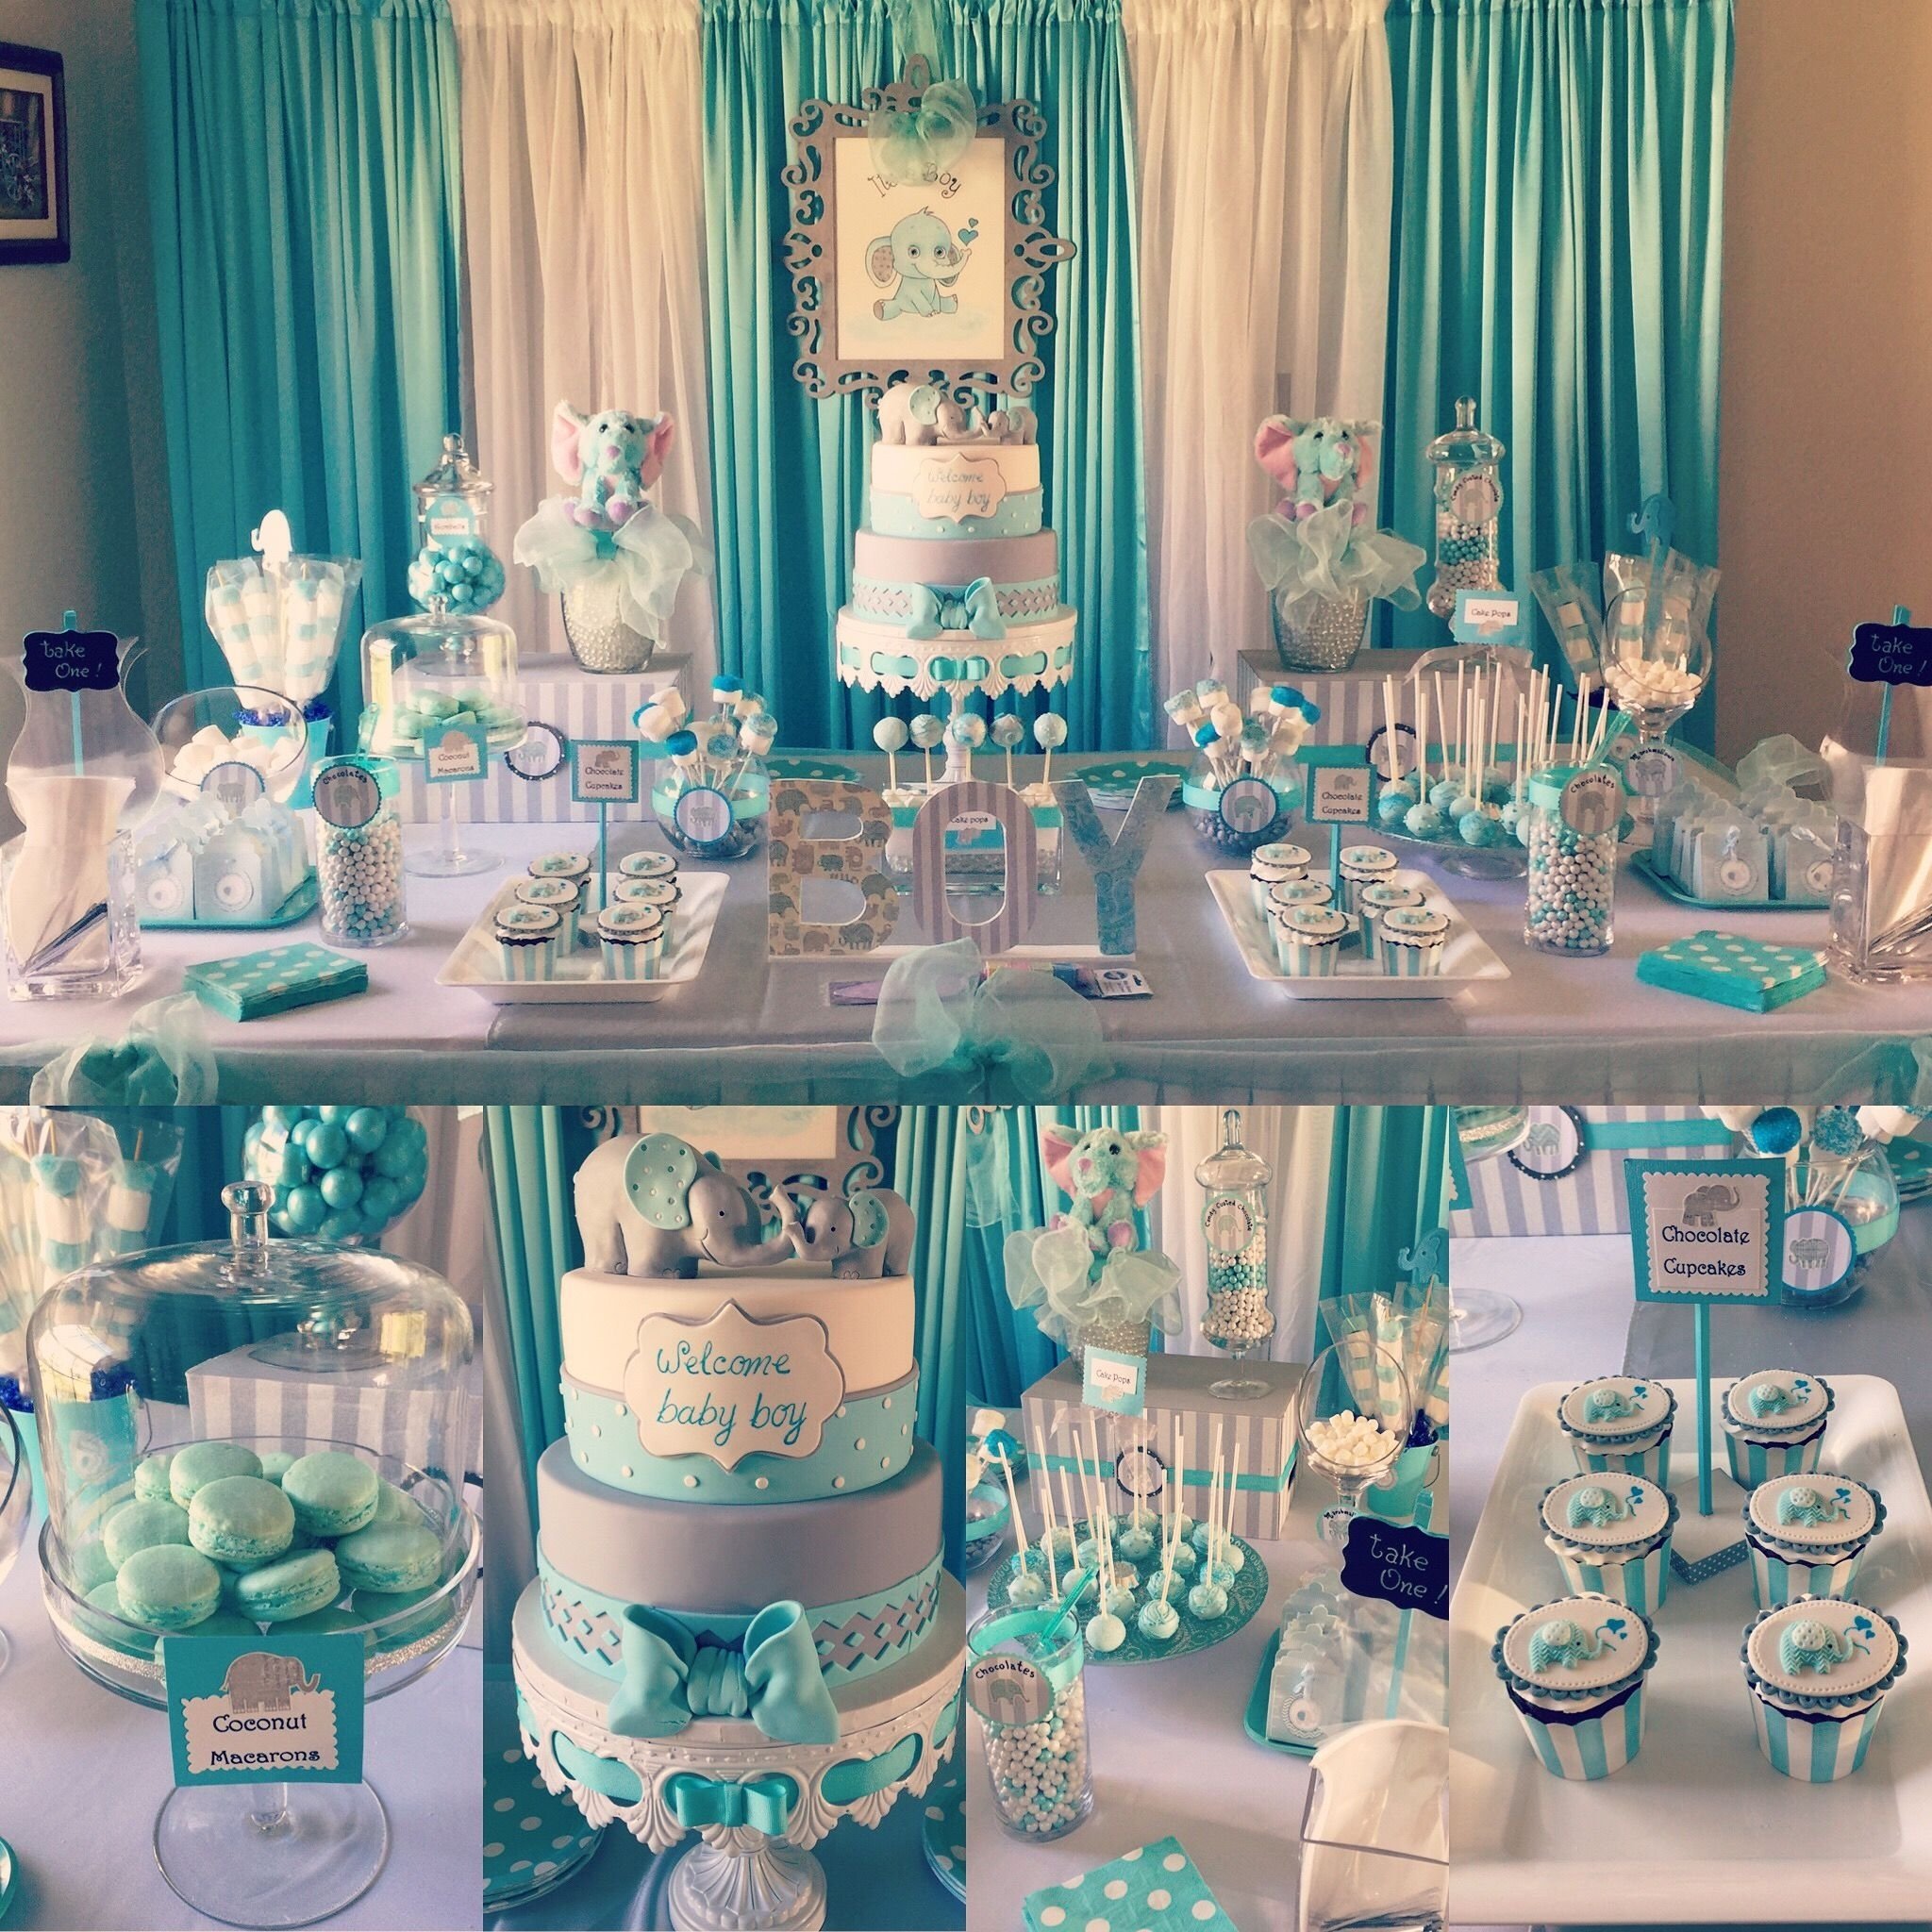 10 Amazing Baby Shower Ideas For Boy unique gender reveal party ideas that wont empty your wallet 15 2023